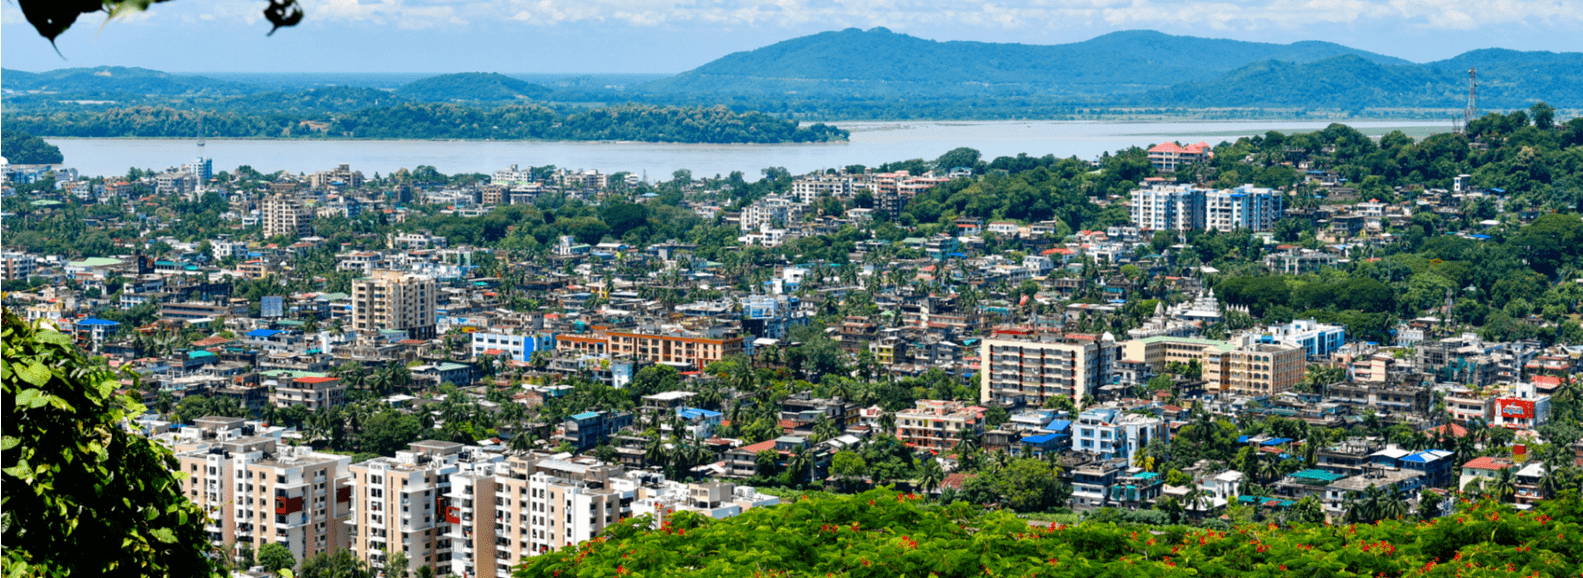 Landscape view of Guwahati city from height shows the beauty of the city